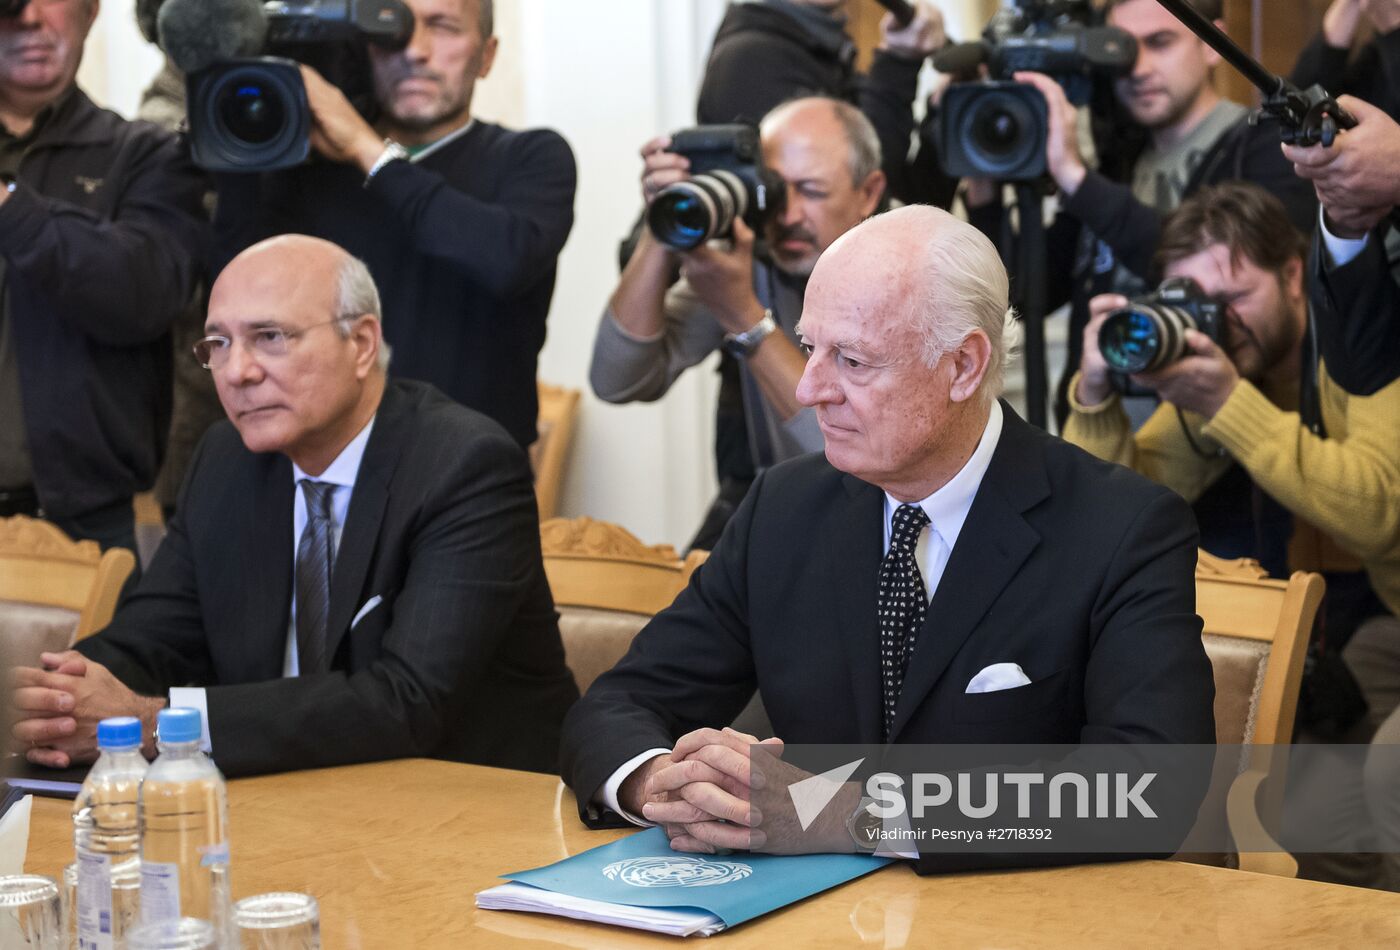 Russian Foreign Minister Sergei Lavrov meets with UN Envoy for Syria Staffan de Mistura